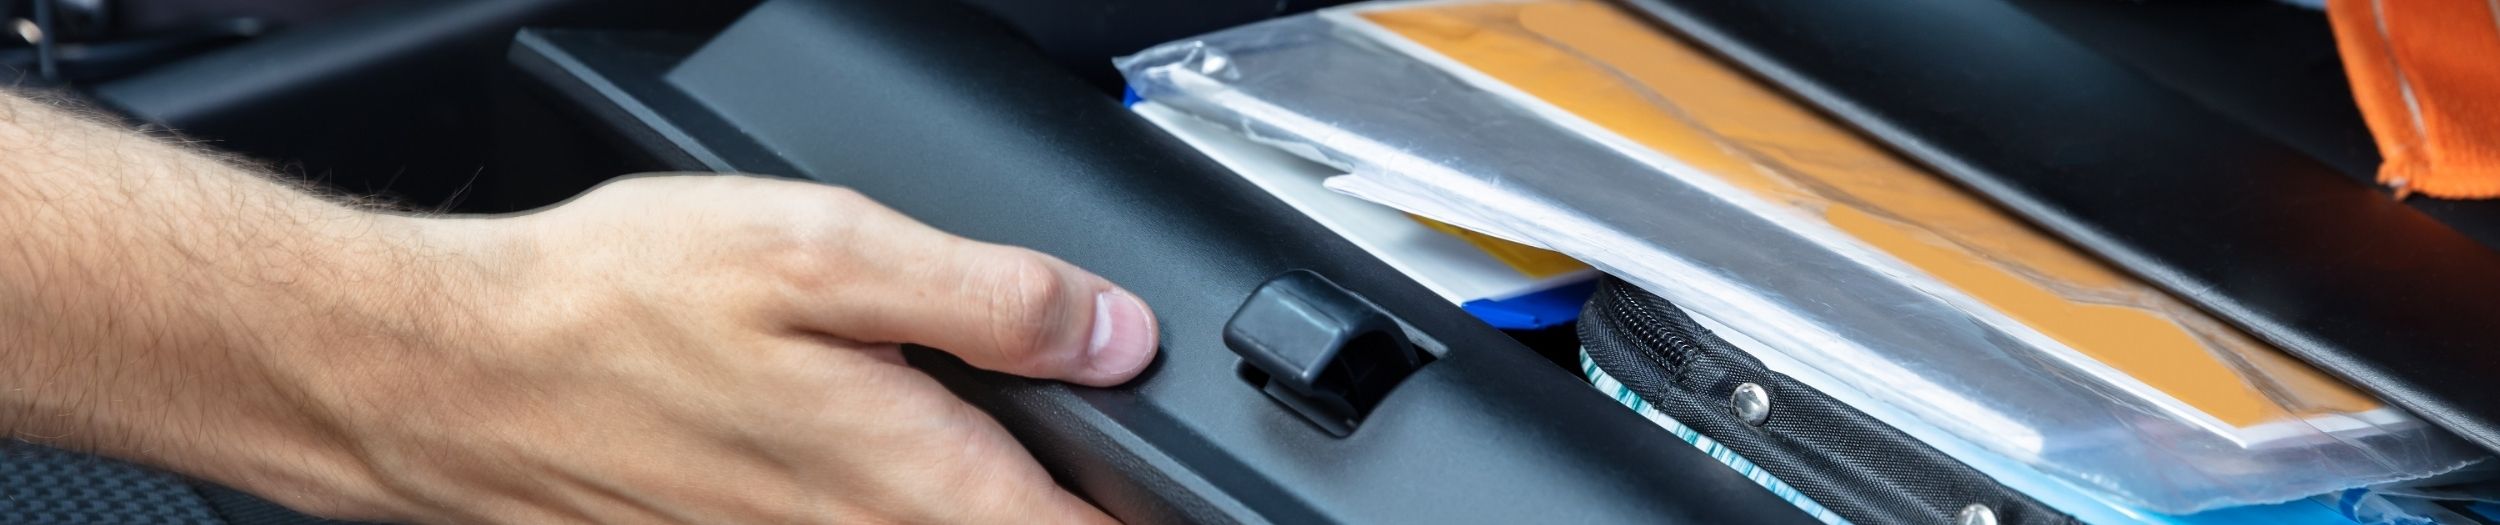 Person opening glove compartment of car